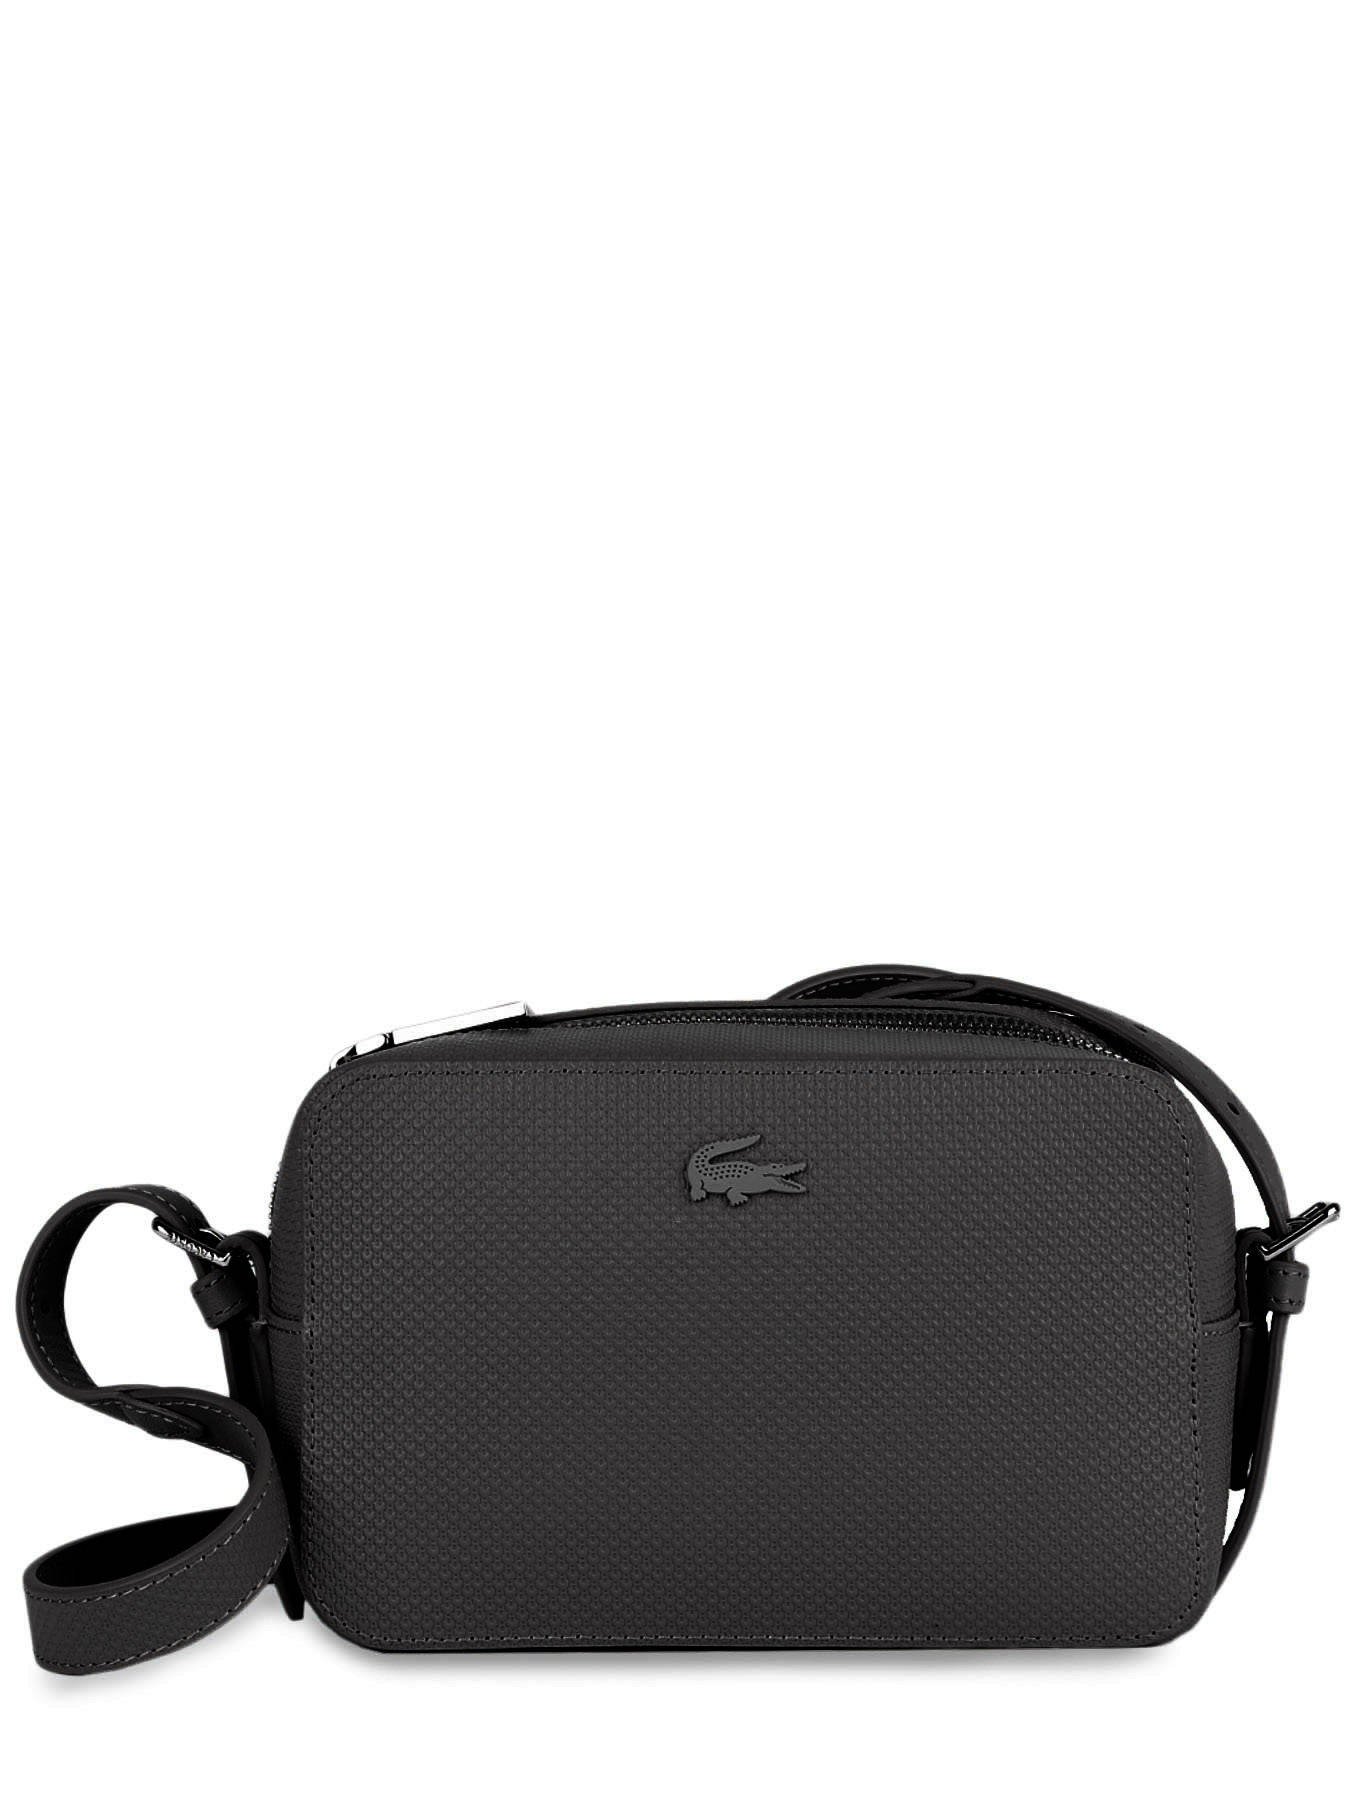 Lacoste bag NF3879KL - best prices